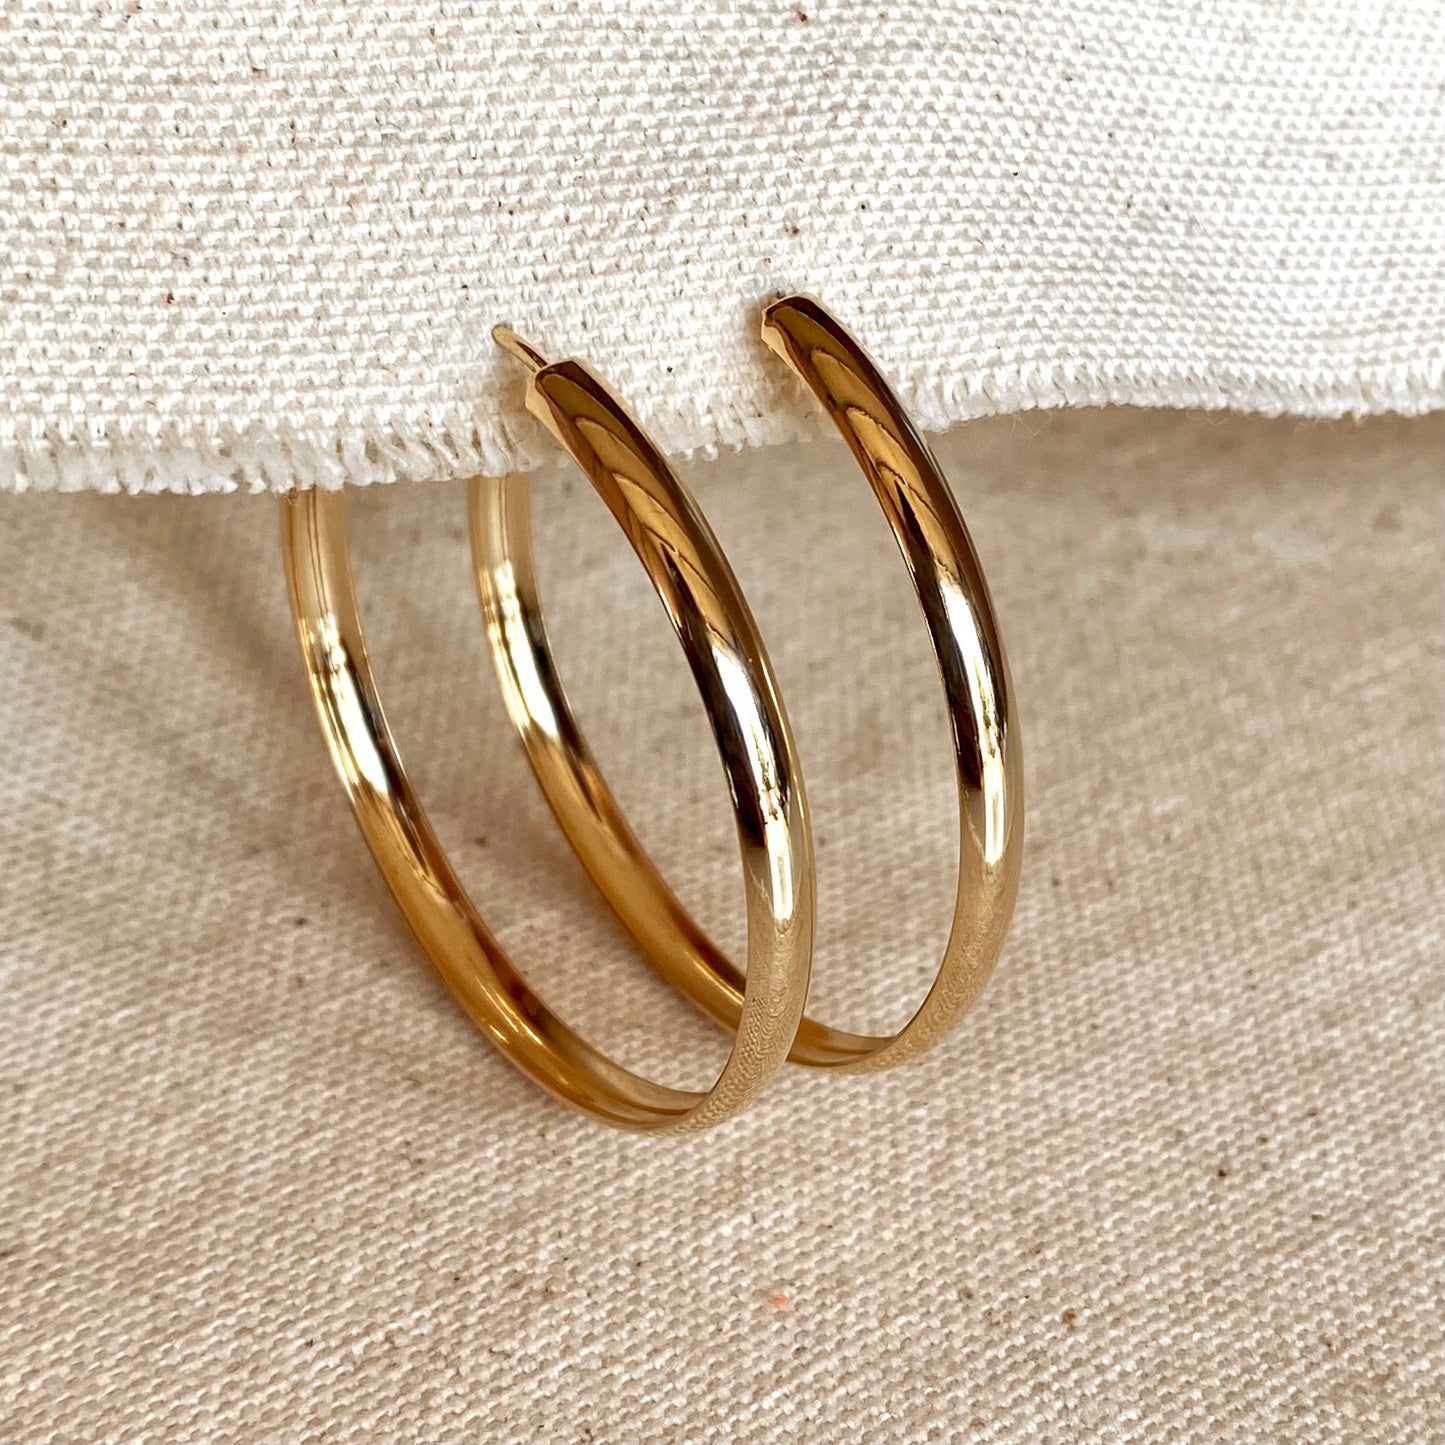 GoldFi 18k Gold Filled 50mm Hollow Continuous Hoop Earrings